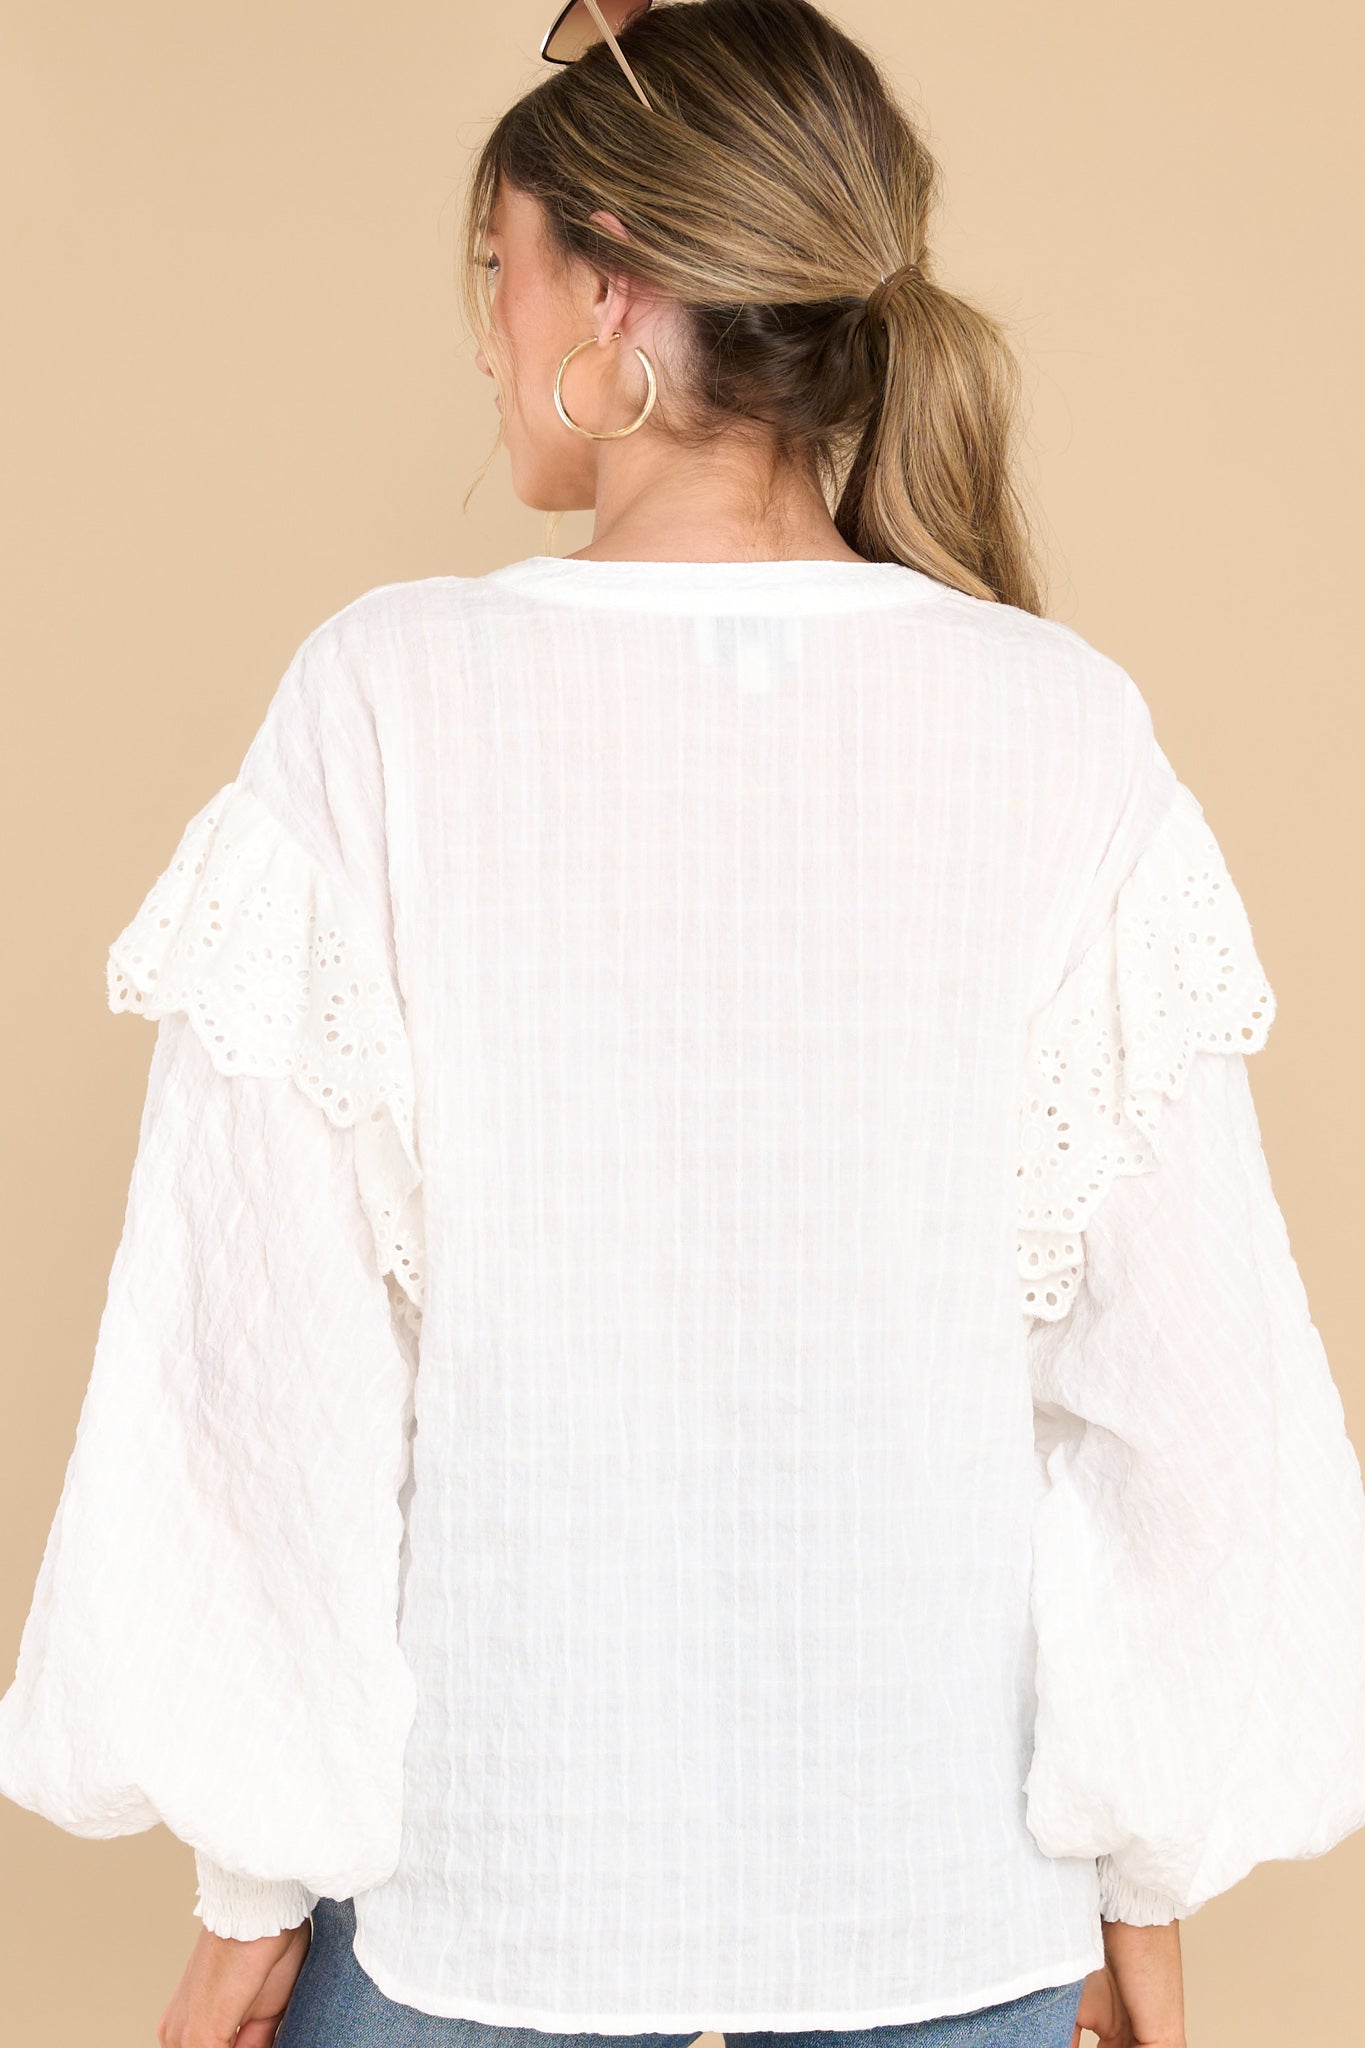 Back view of this top that features a high-neckline, buttons down the front, ruffle detail along the shoulders, puff sleeves with smock detailing at the cuffs, and a relaxed fit.